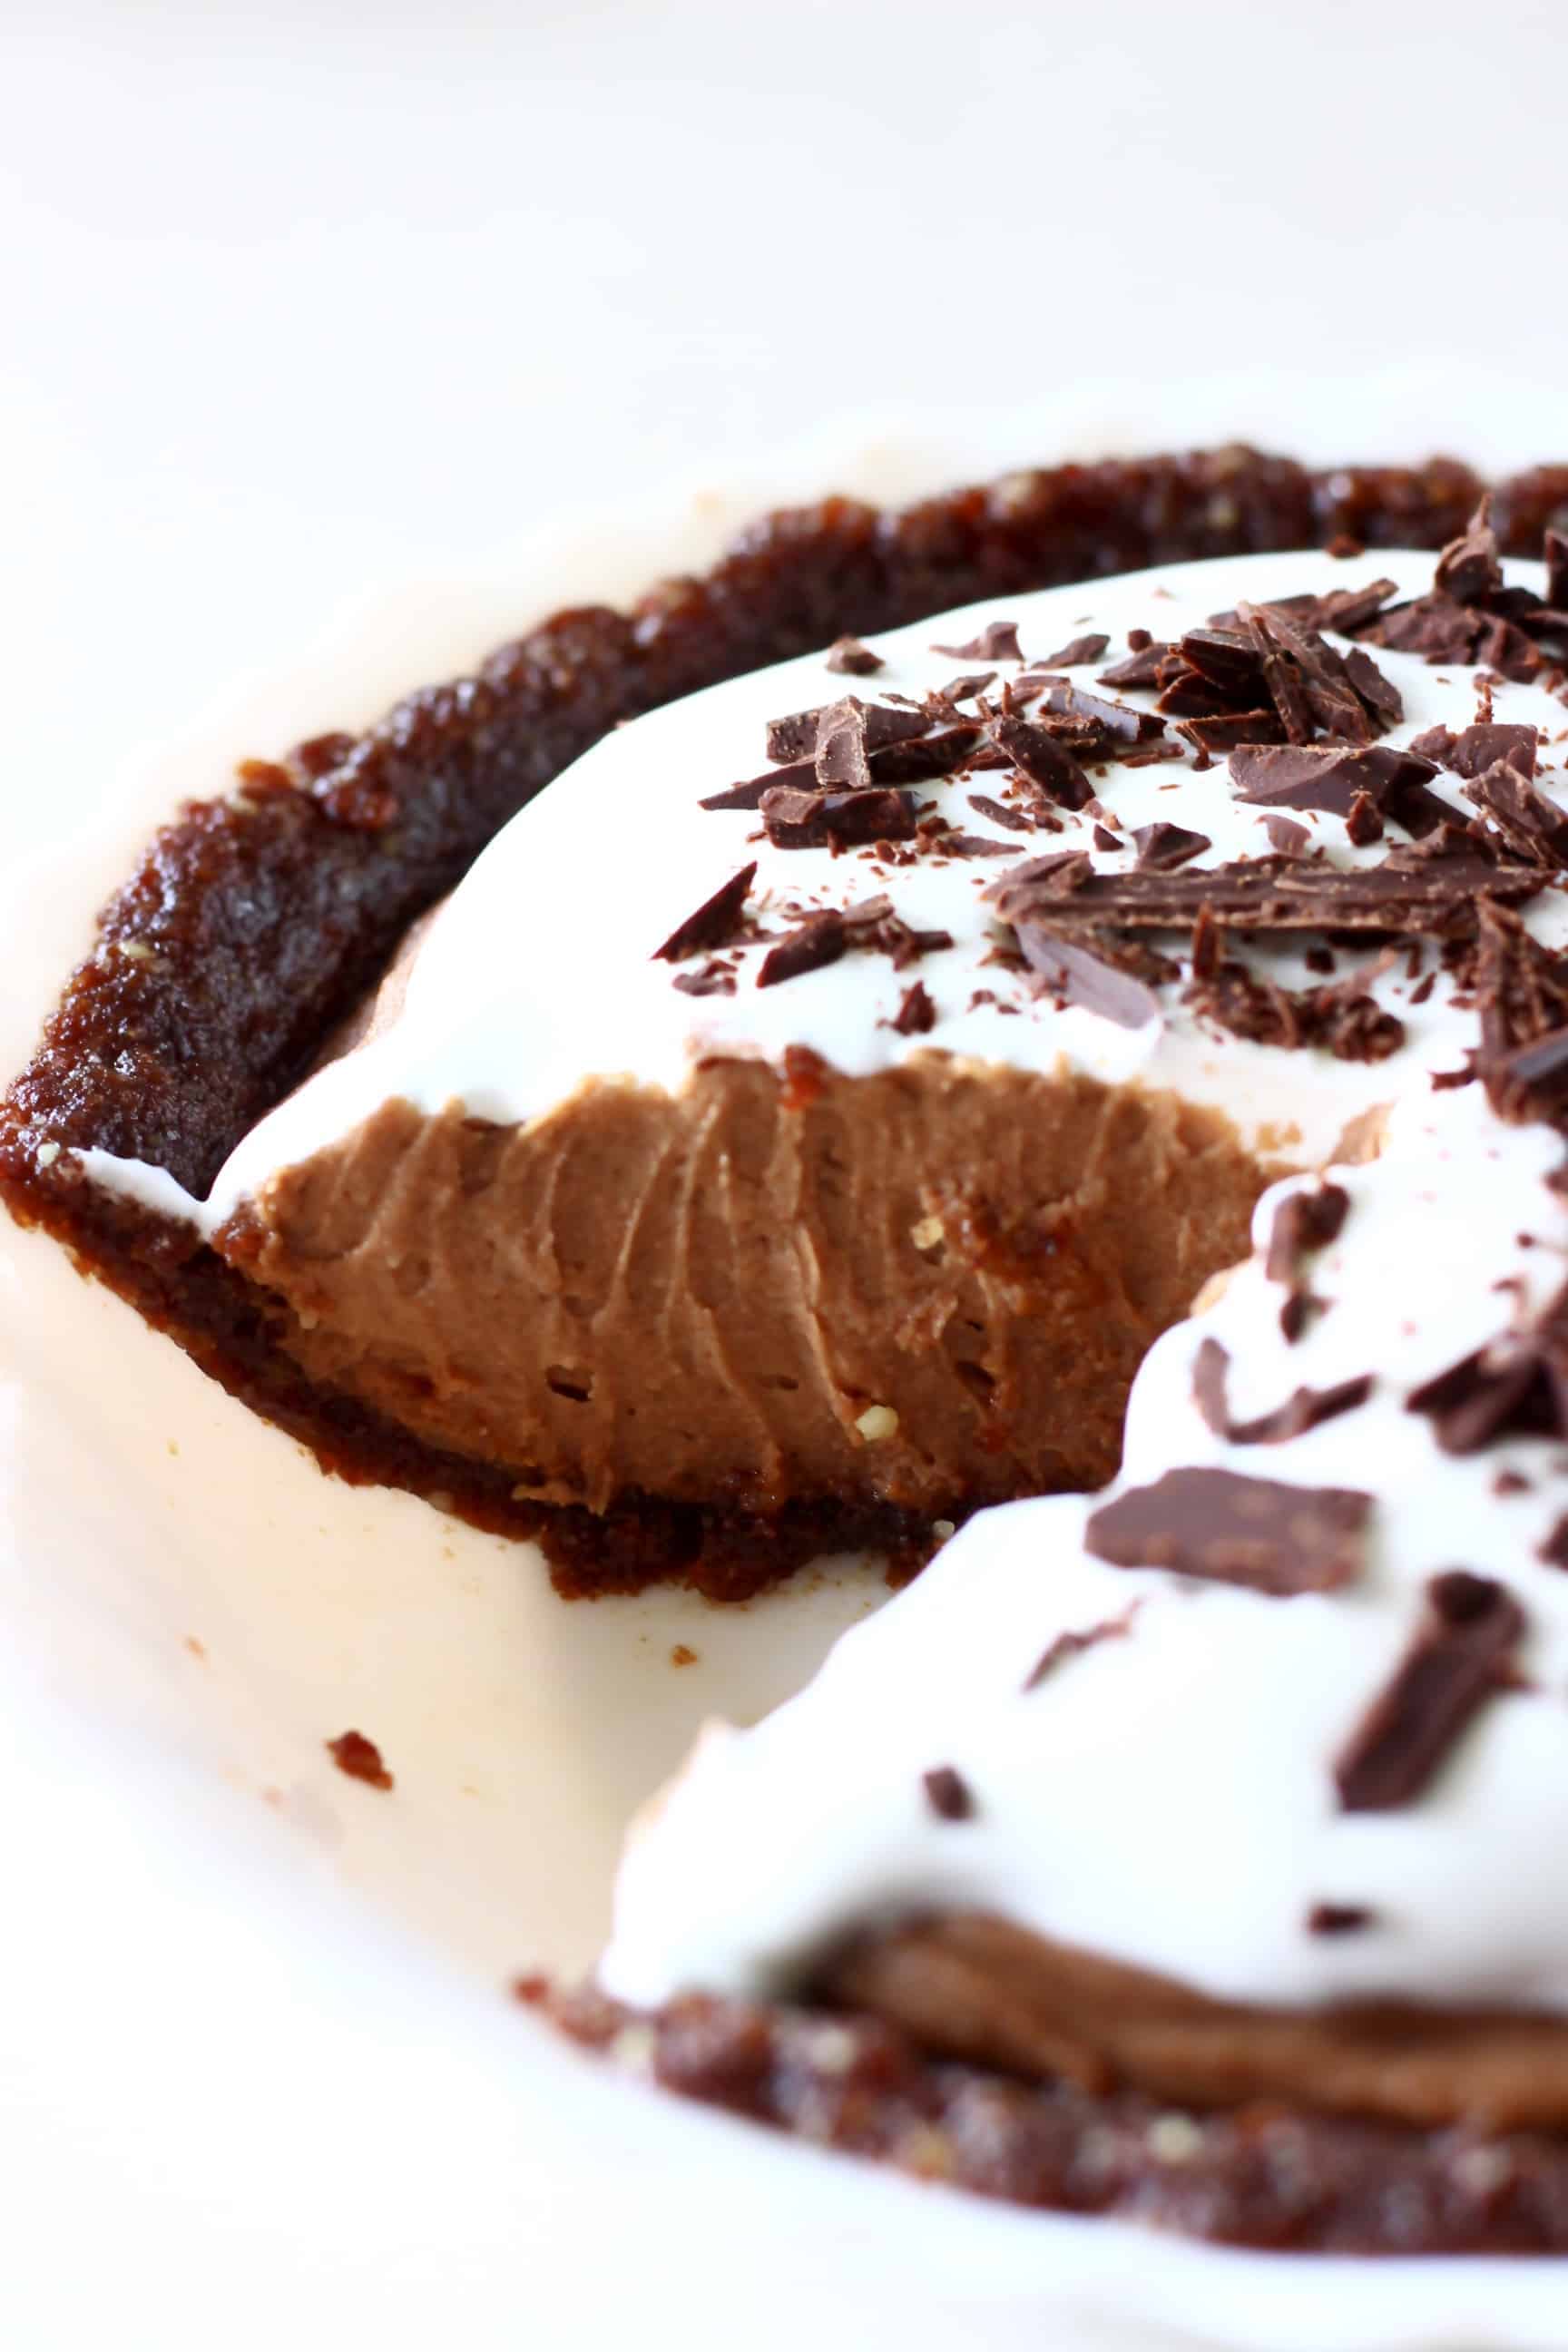 Chocolate pie in a pie dish with a slice cut out of it against a white background